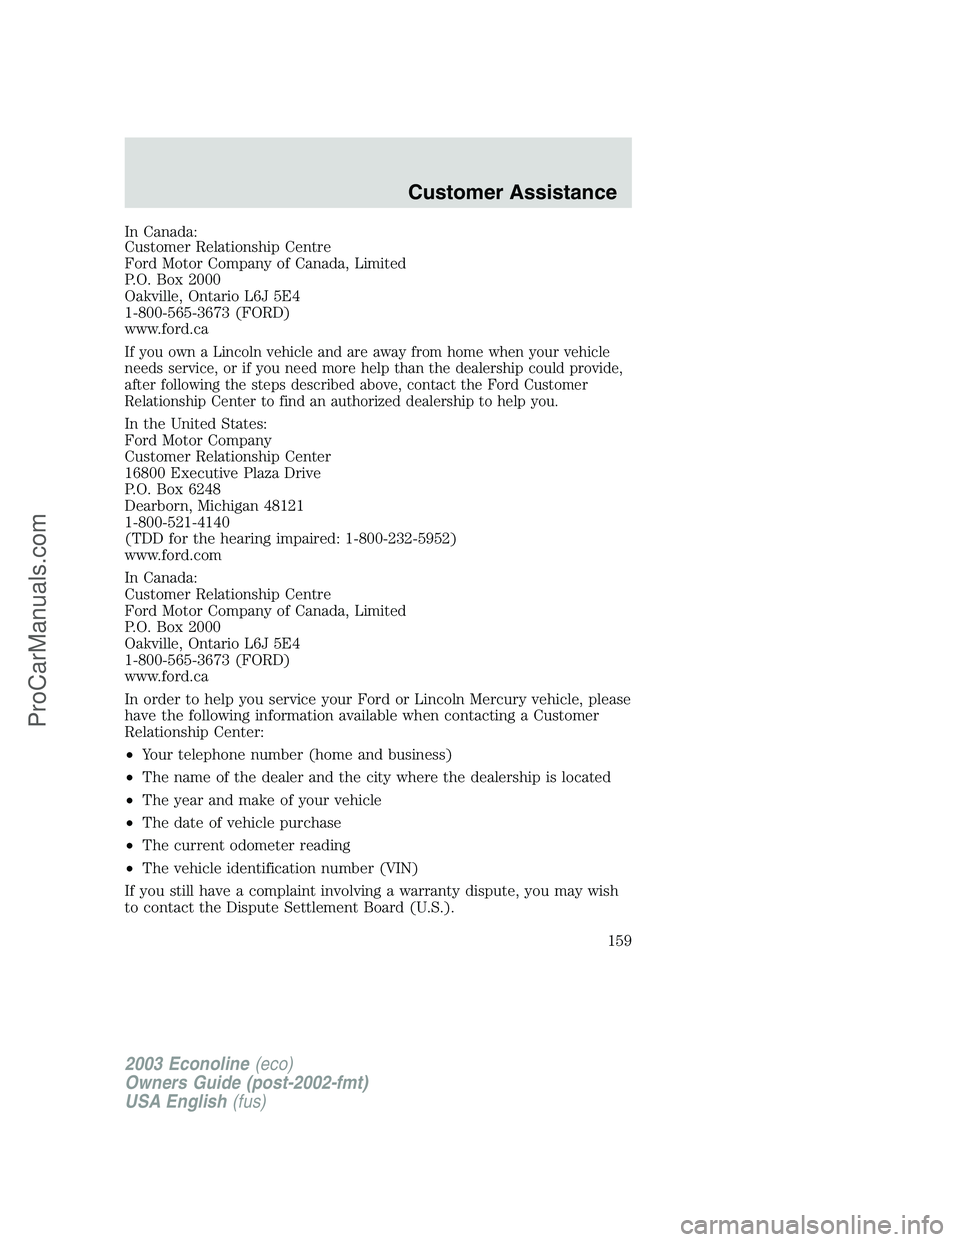 FORD E-450 2003  Owners Manual In Canada:
Customer Relationship Centre
Ford Motor Company of Canada, Limited
P.O. Box 2000
Oakville, Ontario L6J 5E4
1-800-565-3673 (FORD)
www.ford.ca
If you own a Lincoln vehicle and are away from h